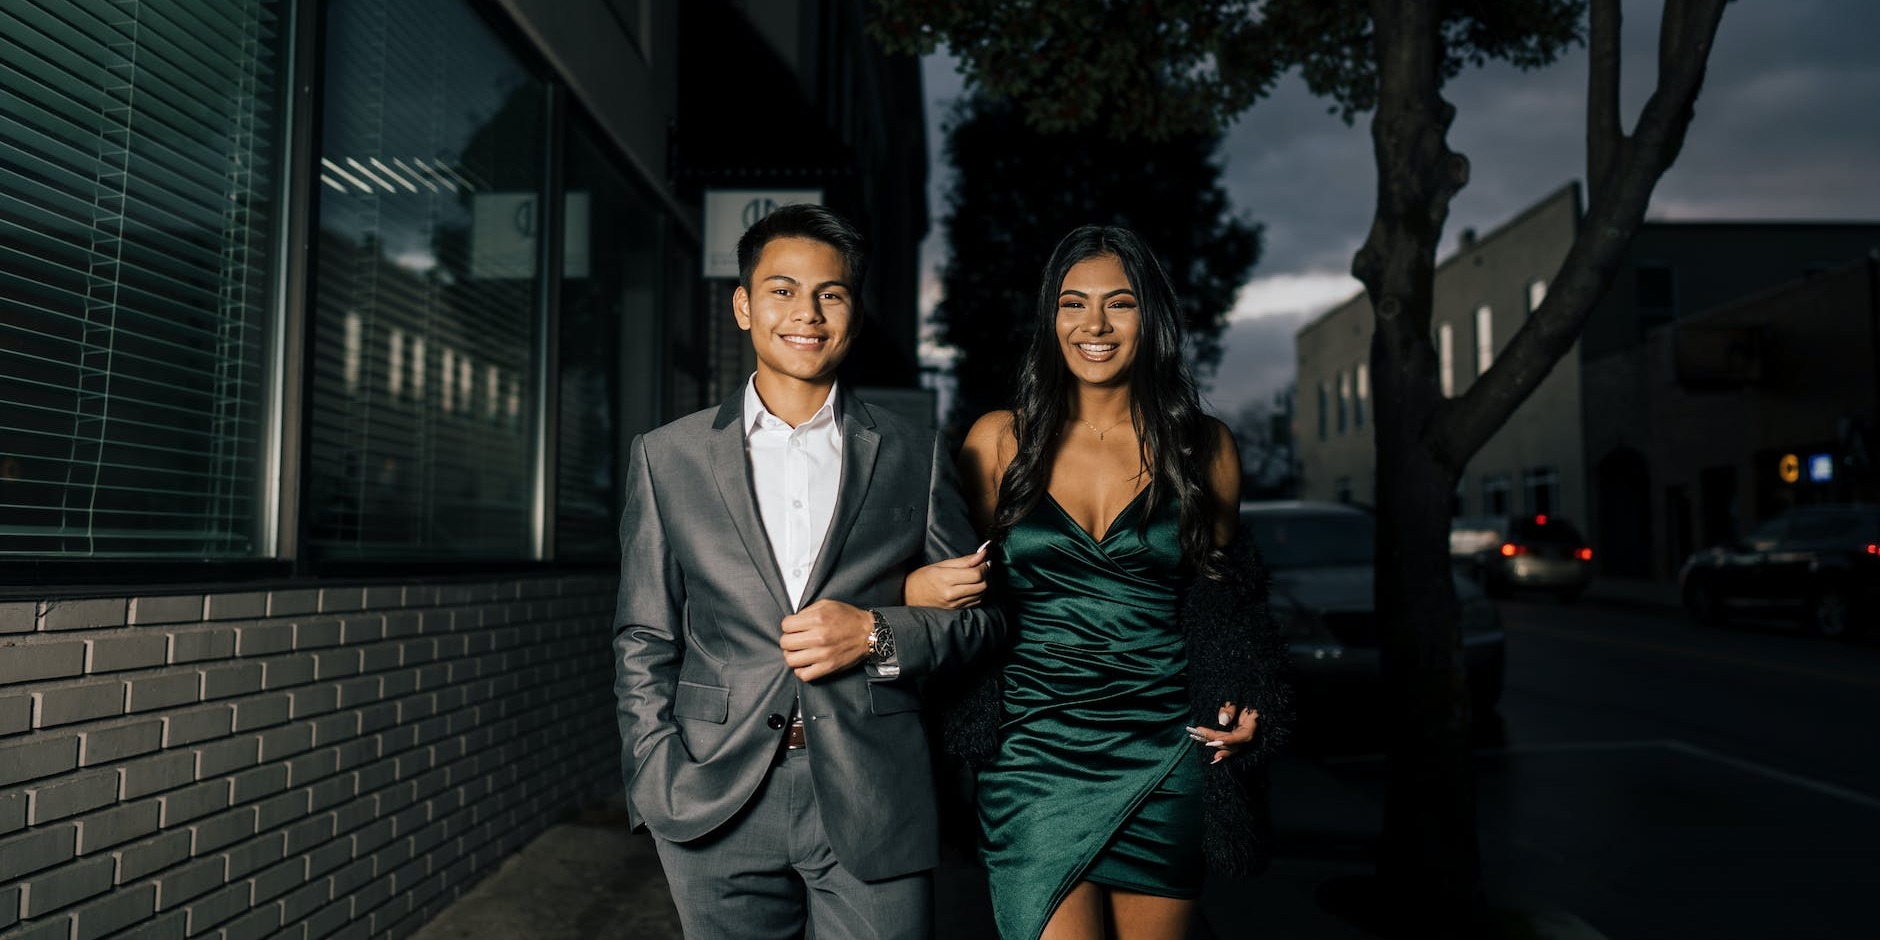 Making a Statement: Unique Limo Options for a Memorable UK Prom Experience